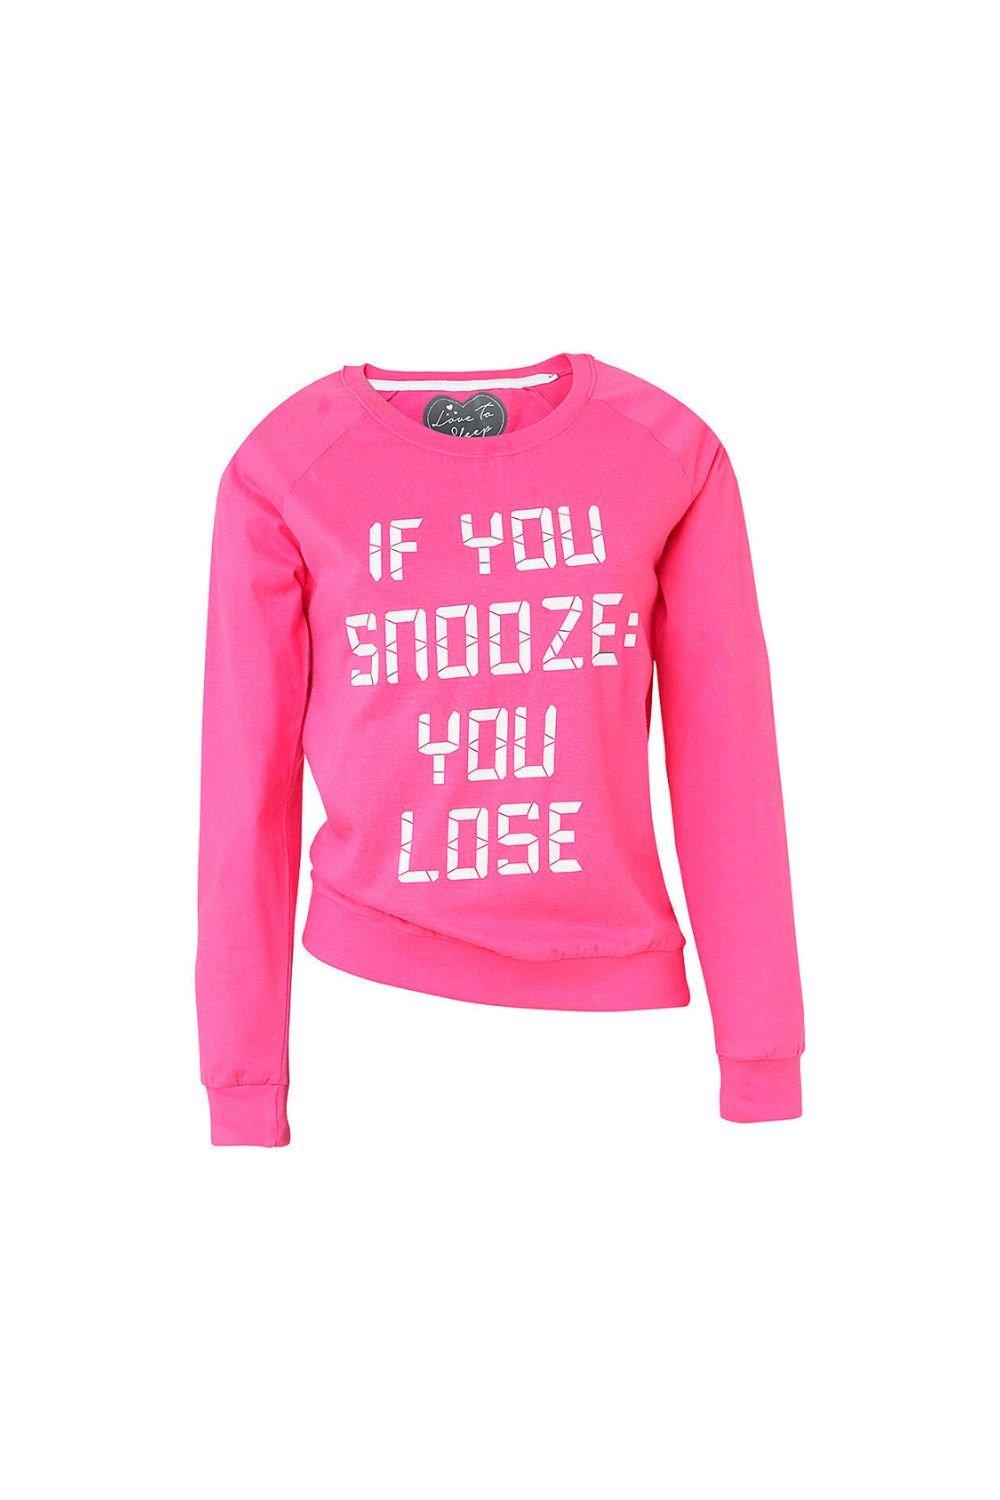 Snooze You Lose Lounge Top